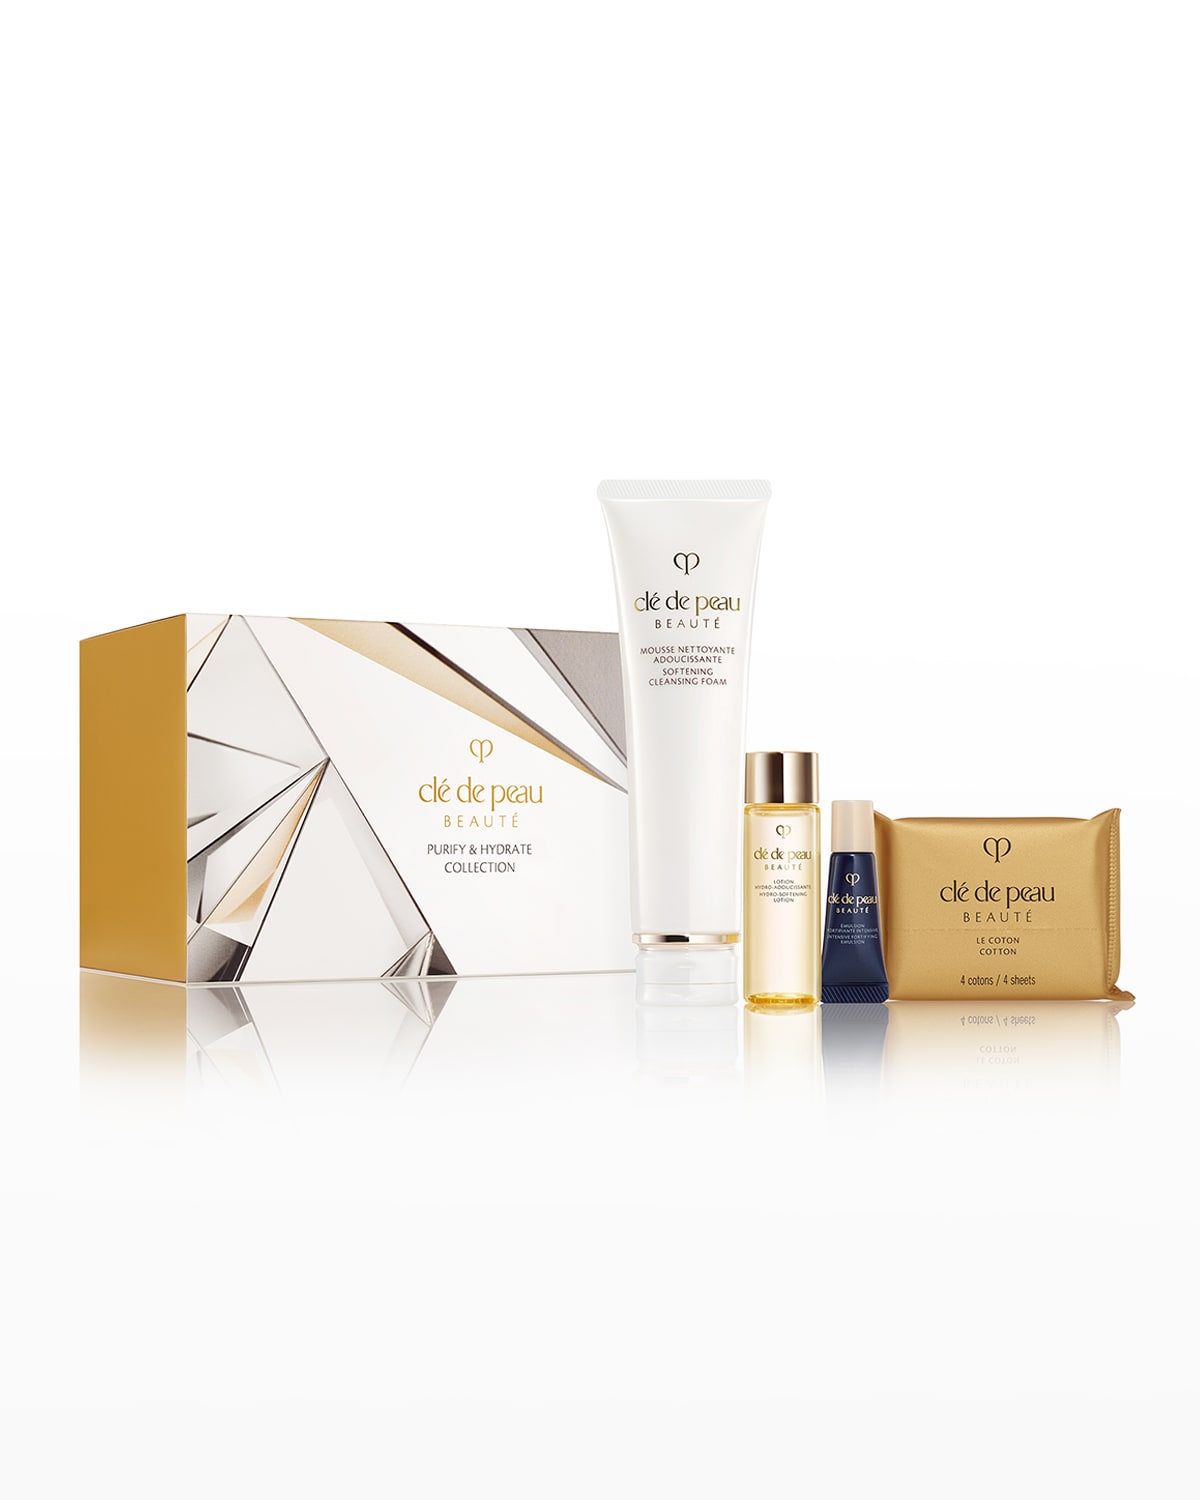 Purify & Hydrate Collection ($104 Value)